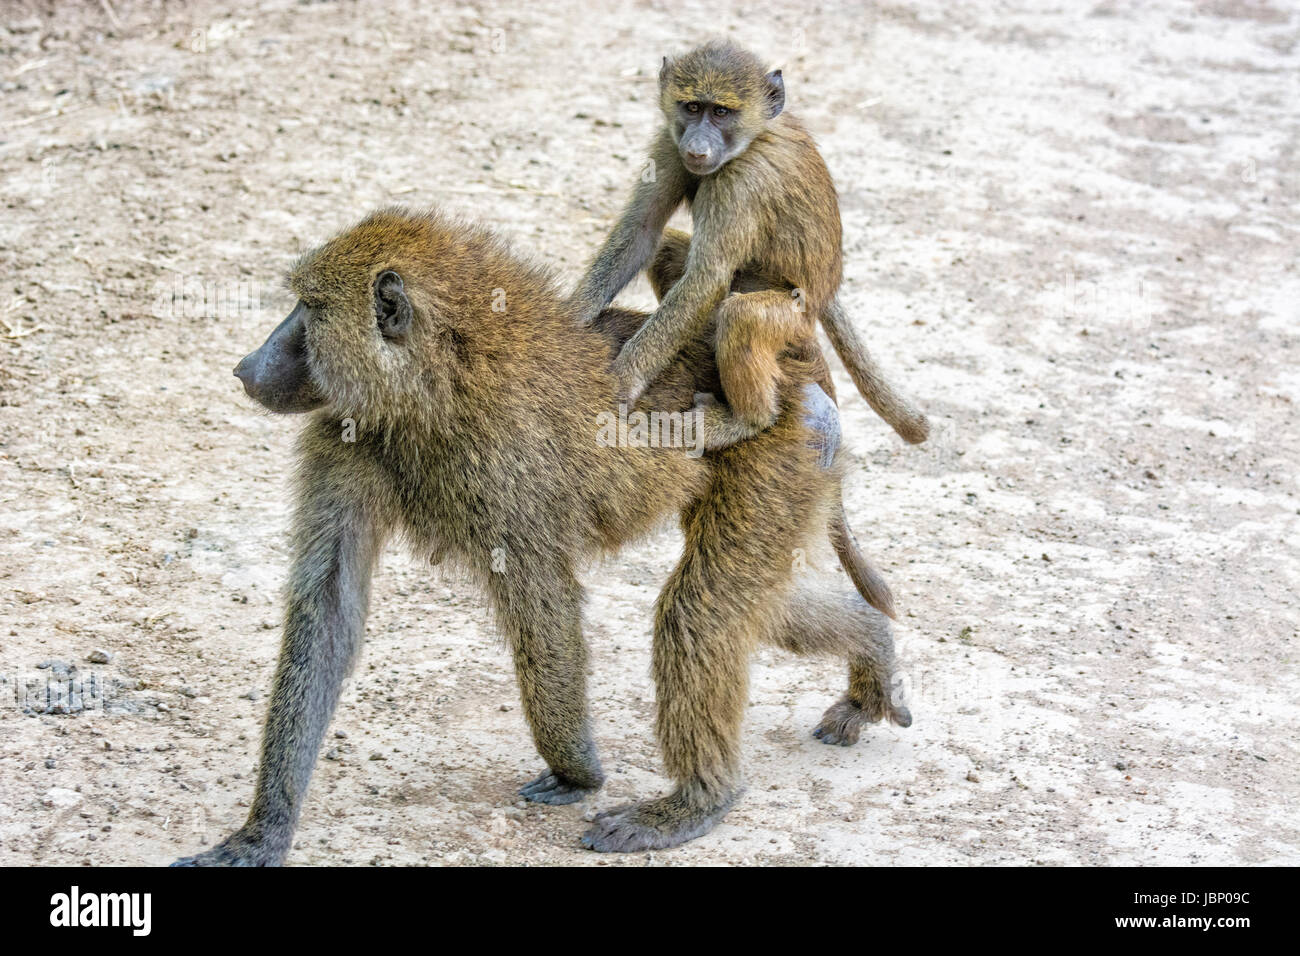 Cute baby Olive Baboon, Papio anubis, carried, riding, on its mother's back, Nakuru National Park, Kenya, East Africa Stock Photo